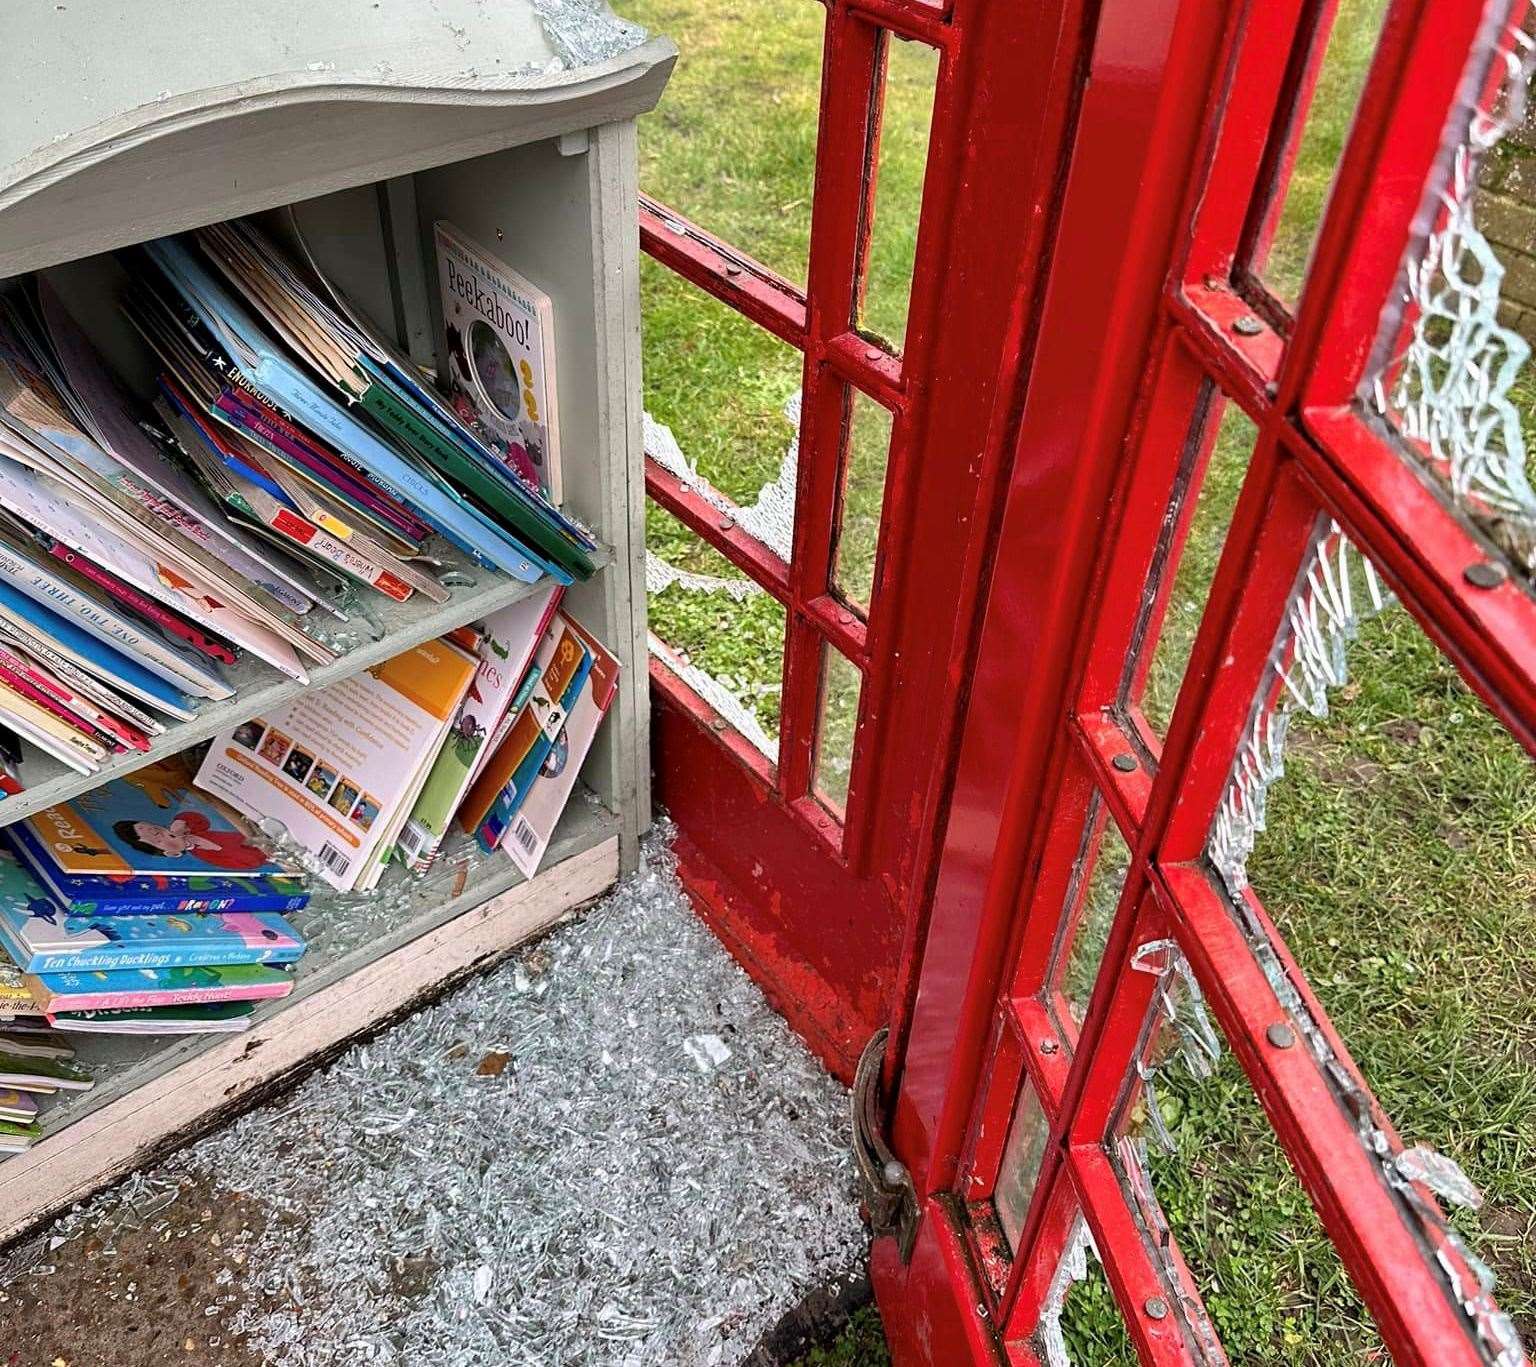 Piles of glass were left covering the books and on the floor. Picture: Cllr Linda Harman